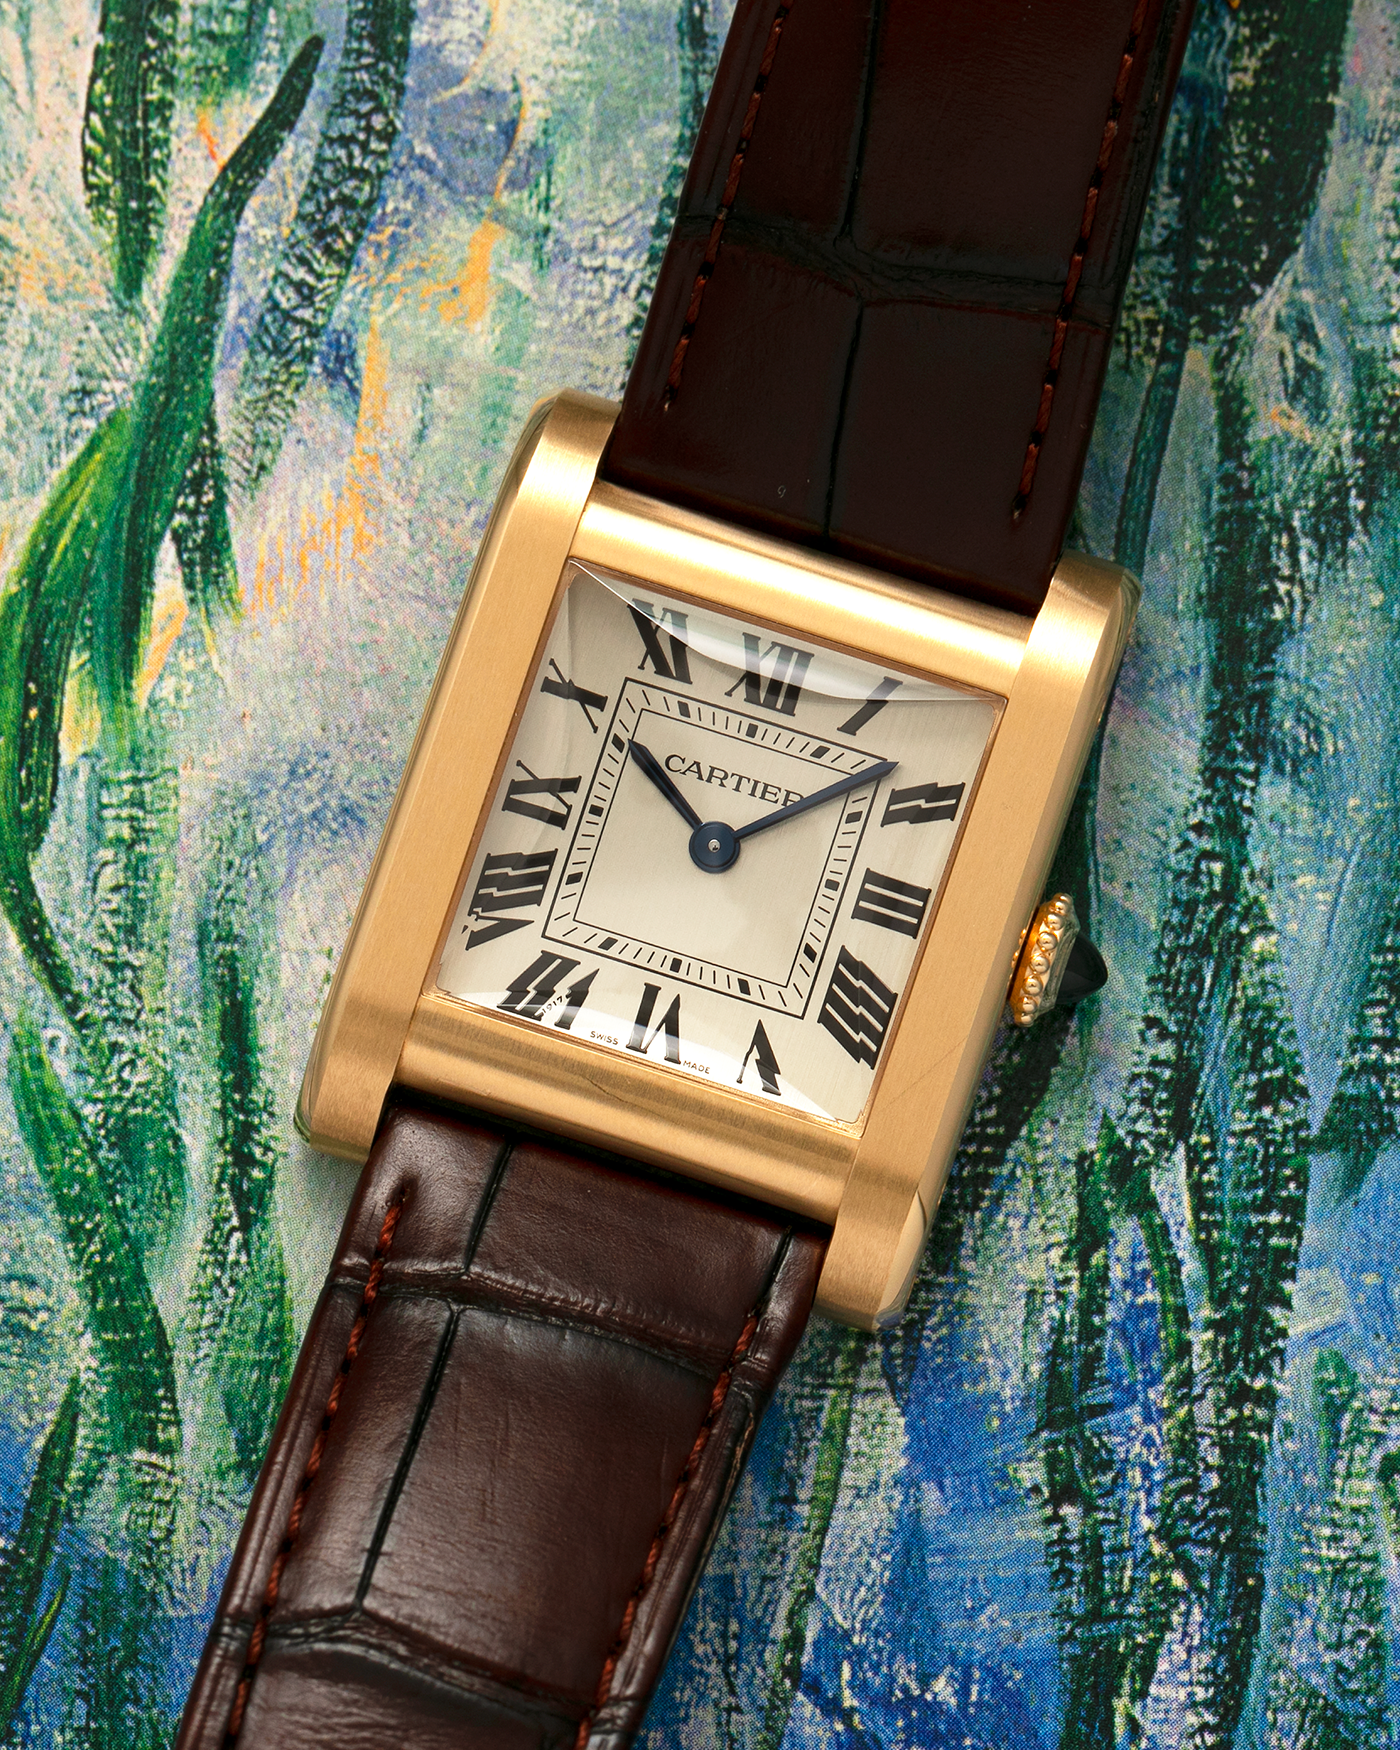 Brand: Cartier Year: 2023 Model: Privé Tank Normale, Limited to 200 Pieces in this Combination Reference Number: CRWGTA0108 Material: 18-carat Yellow Gold Movement: Cartier Cal. 070 MC, Manual-Winding Case Dimensions: 32.6mm x 25.7mm Lug Width: 19mm Strap: Cartier Brown Alligator Leather Strap with Signed 18-carat Yellow Gold Tang Buckle